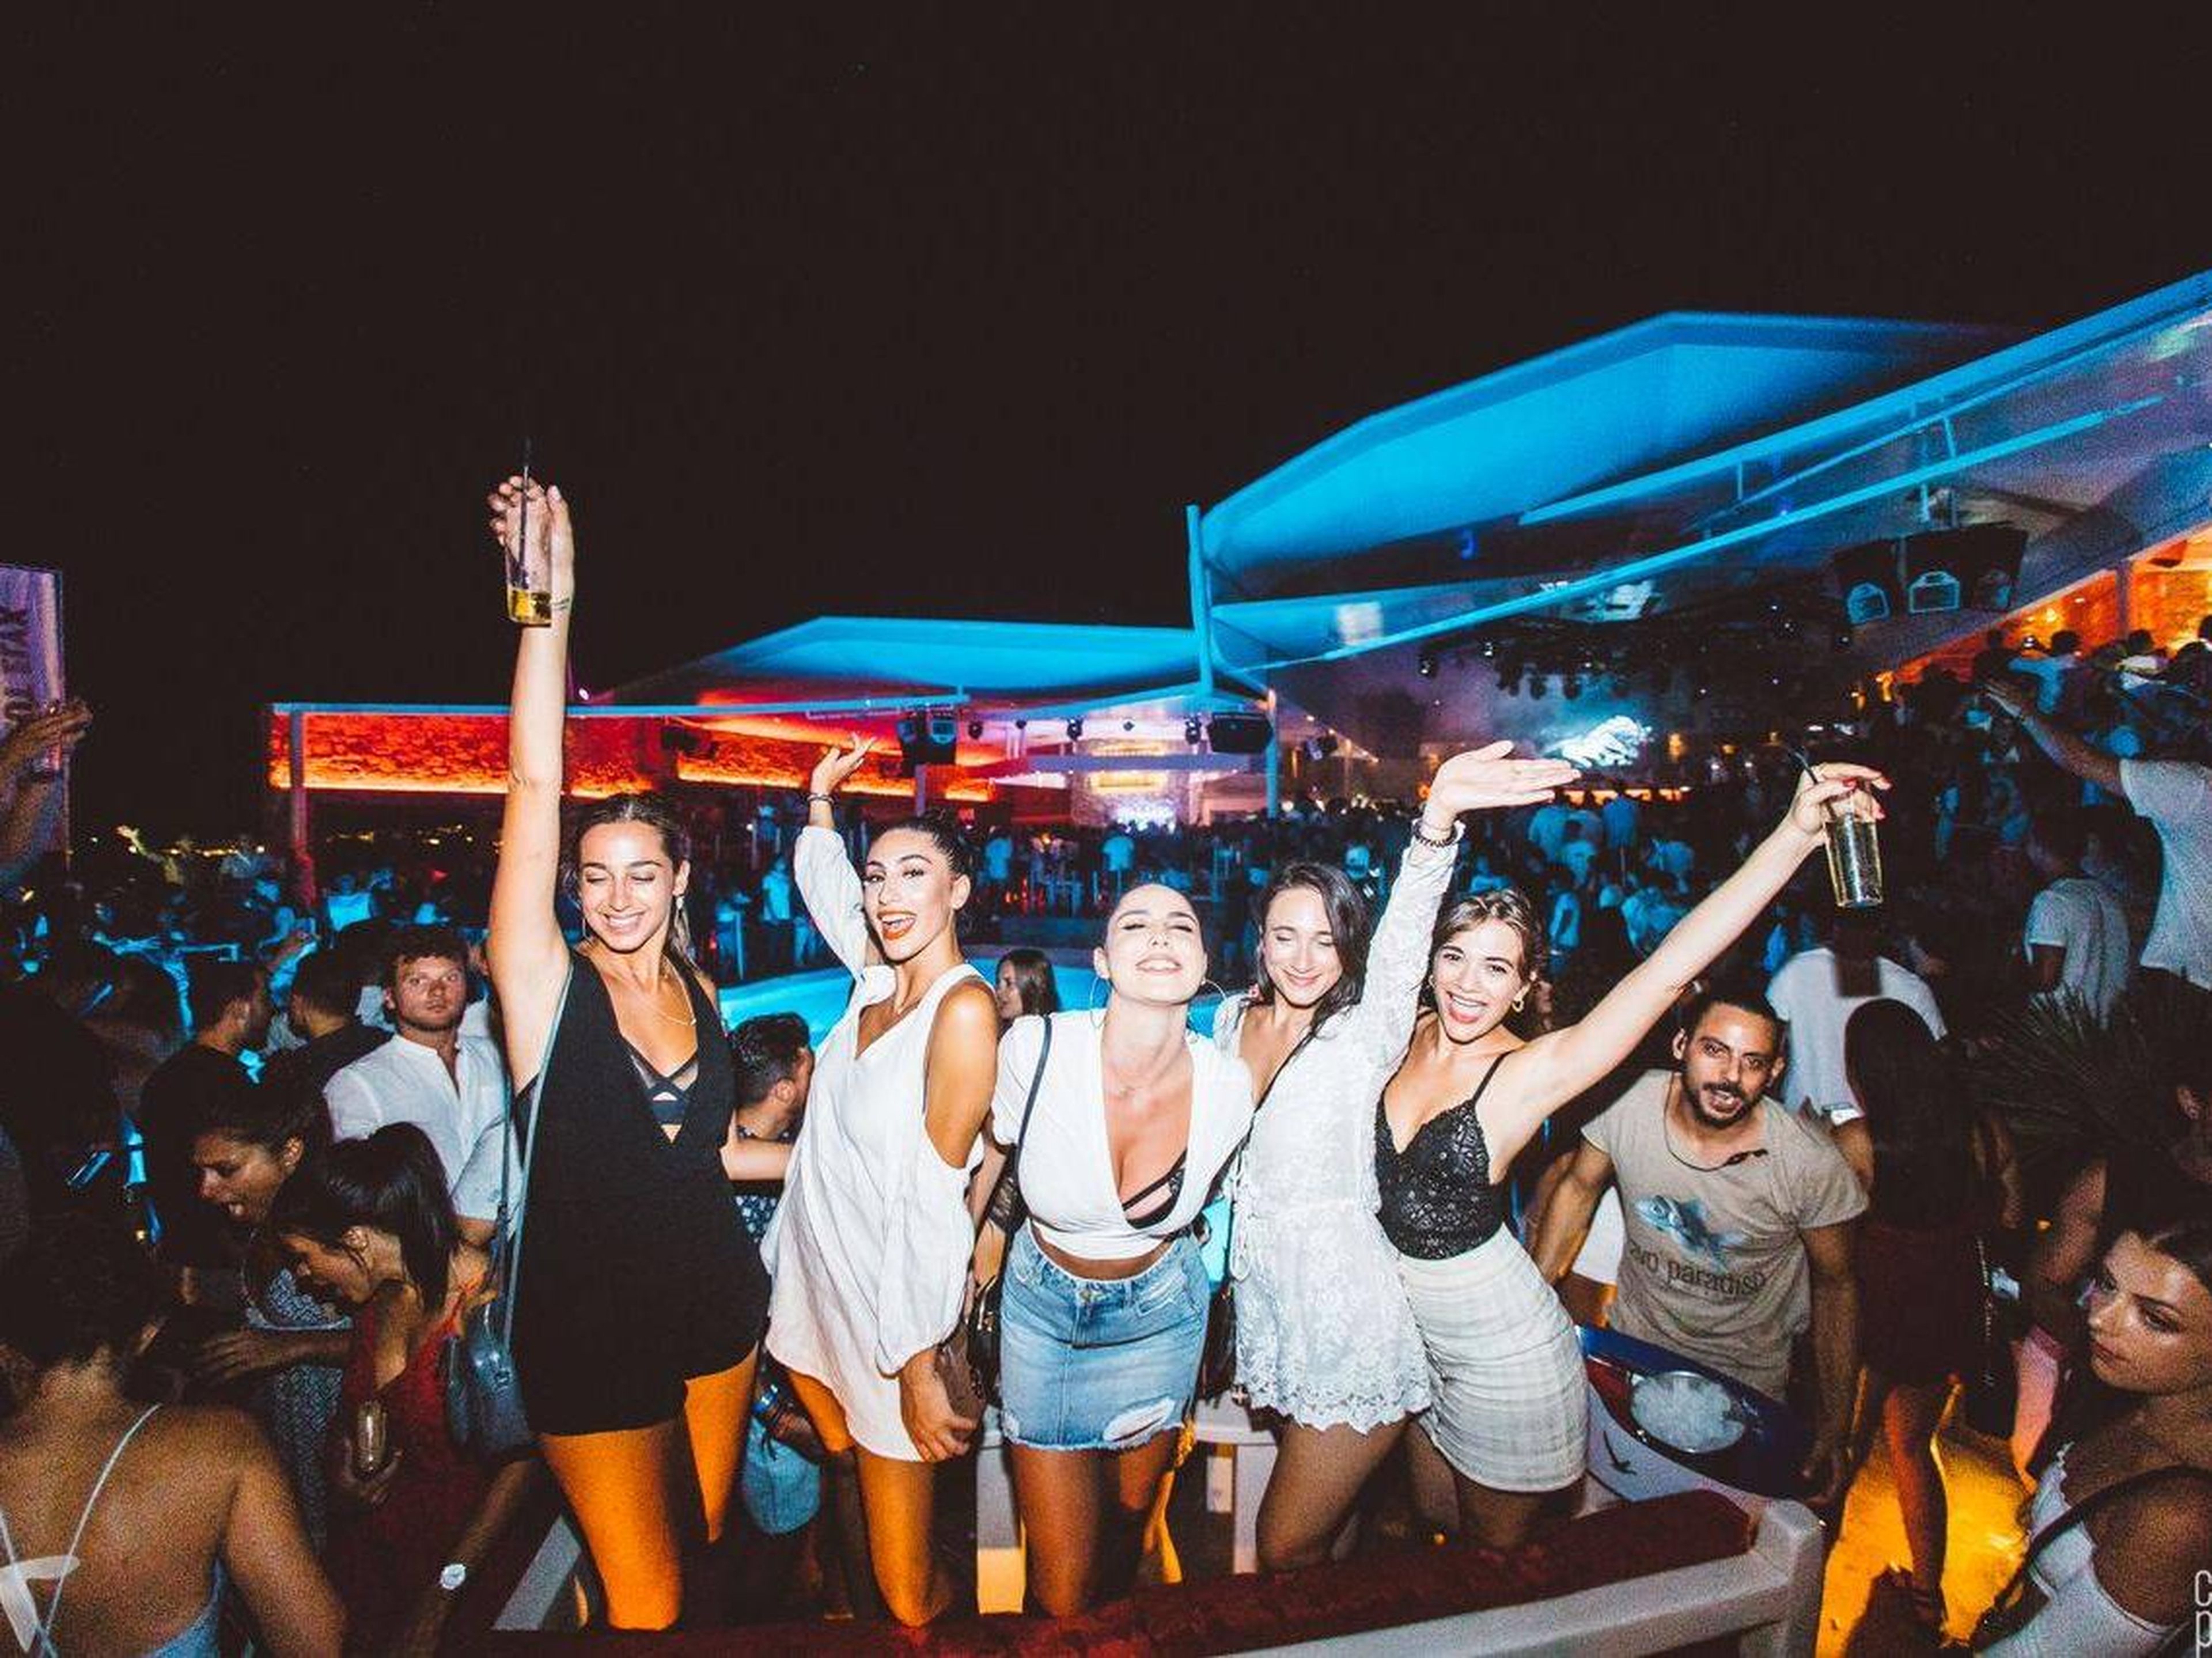 Mykonos doesn't have a ton of clubs, but it does have Cavo Paradiso, , a 2,000-person open-air club on a cliff overlooking the Aegean. Many international DJ superstars like Afrojack consider it a legendary venue.